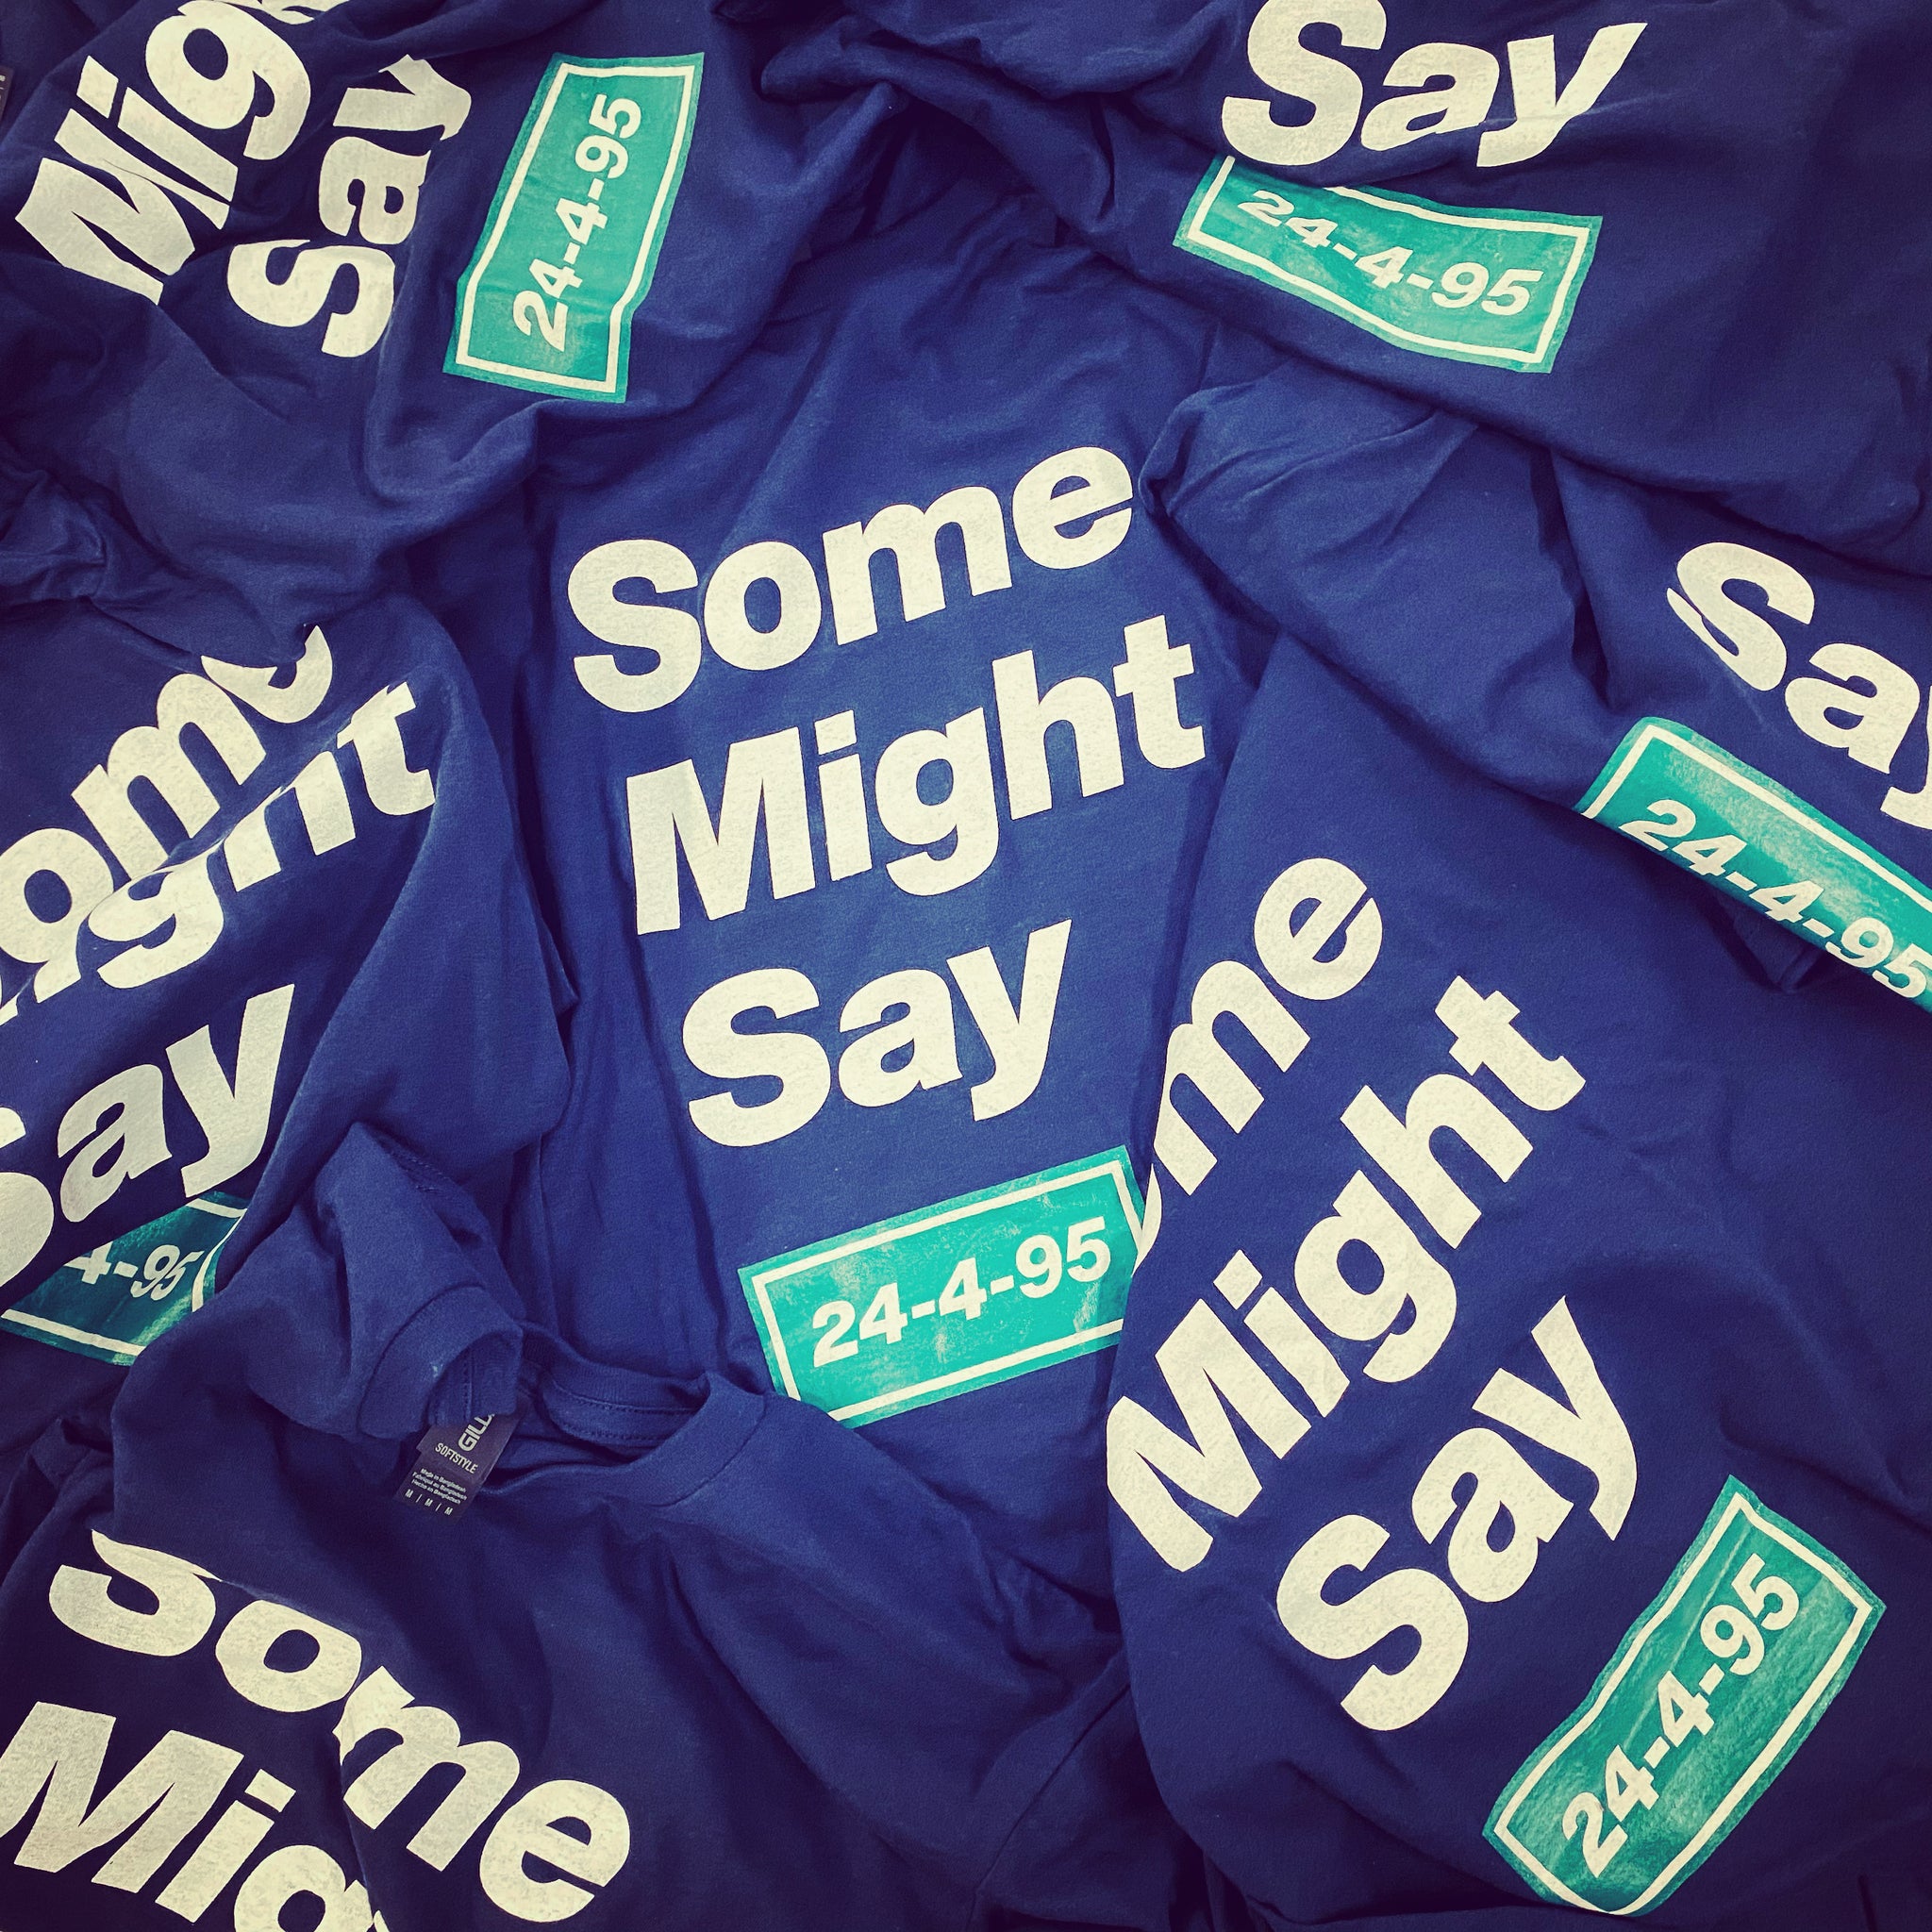 Oasis - Some Might Say - T Shirt - New Item